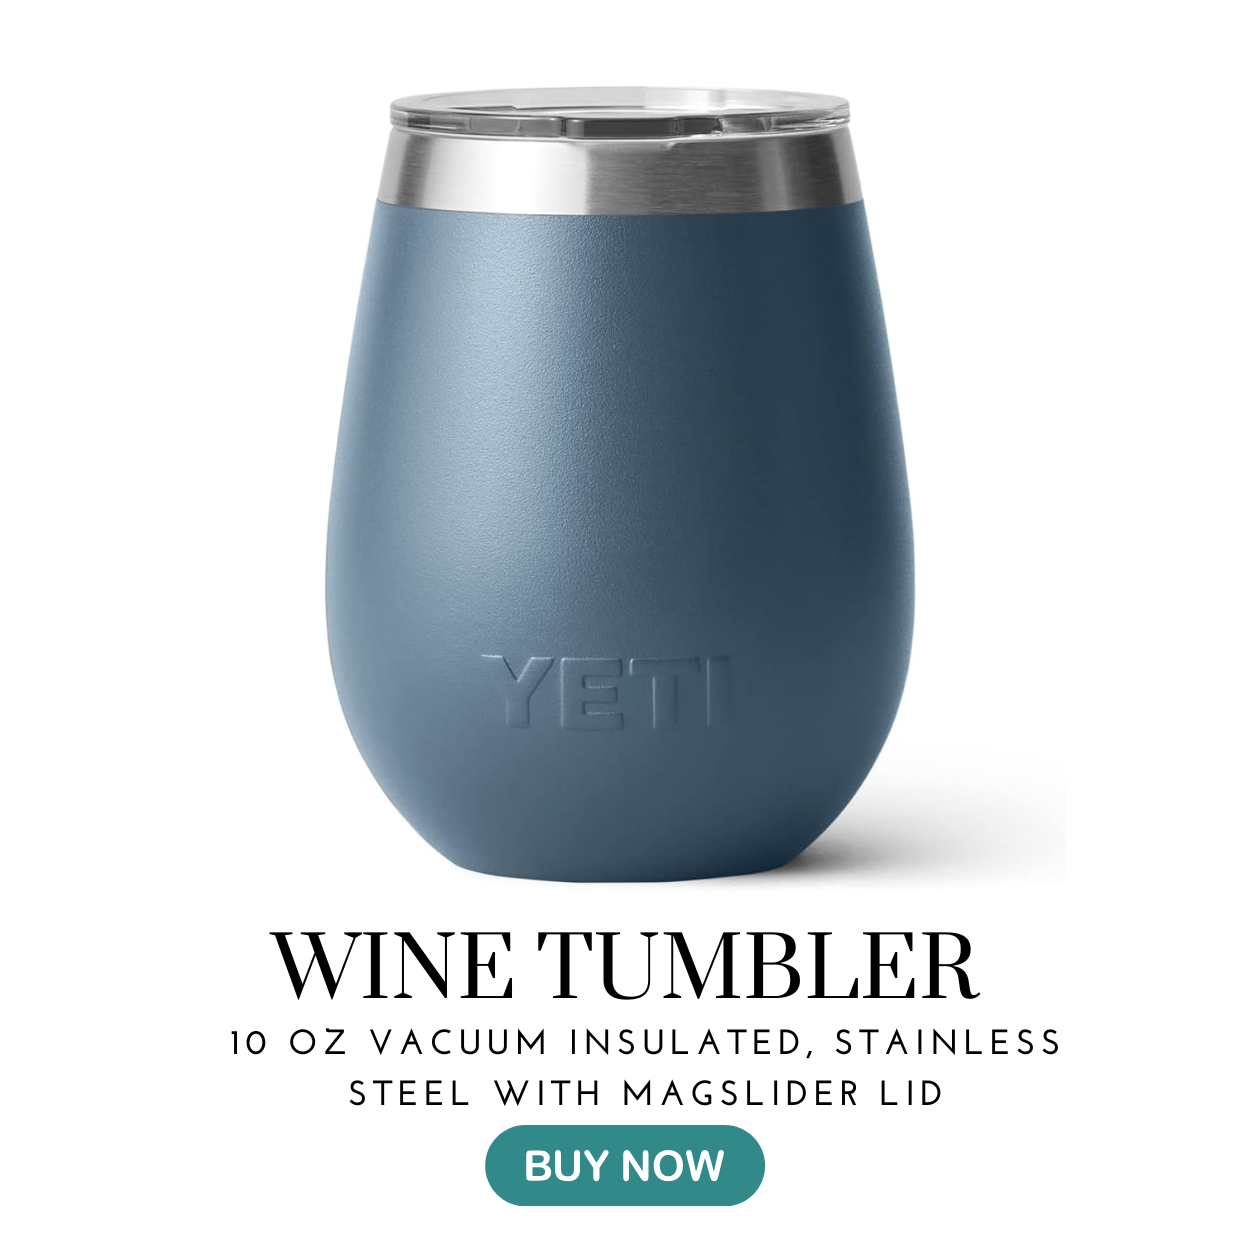 Yeti's Top 5 Mother’s Day Gifts with Free Customization